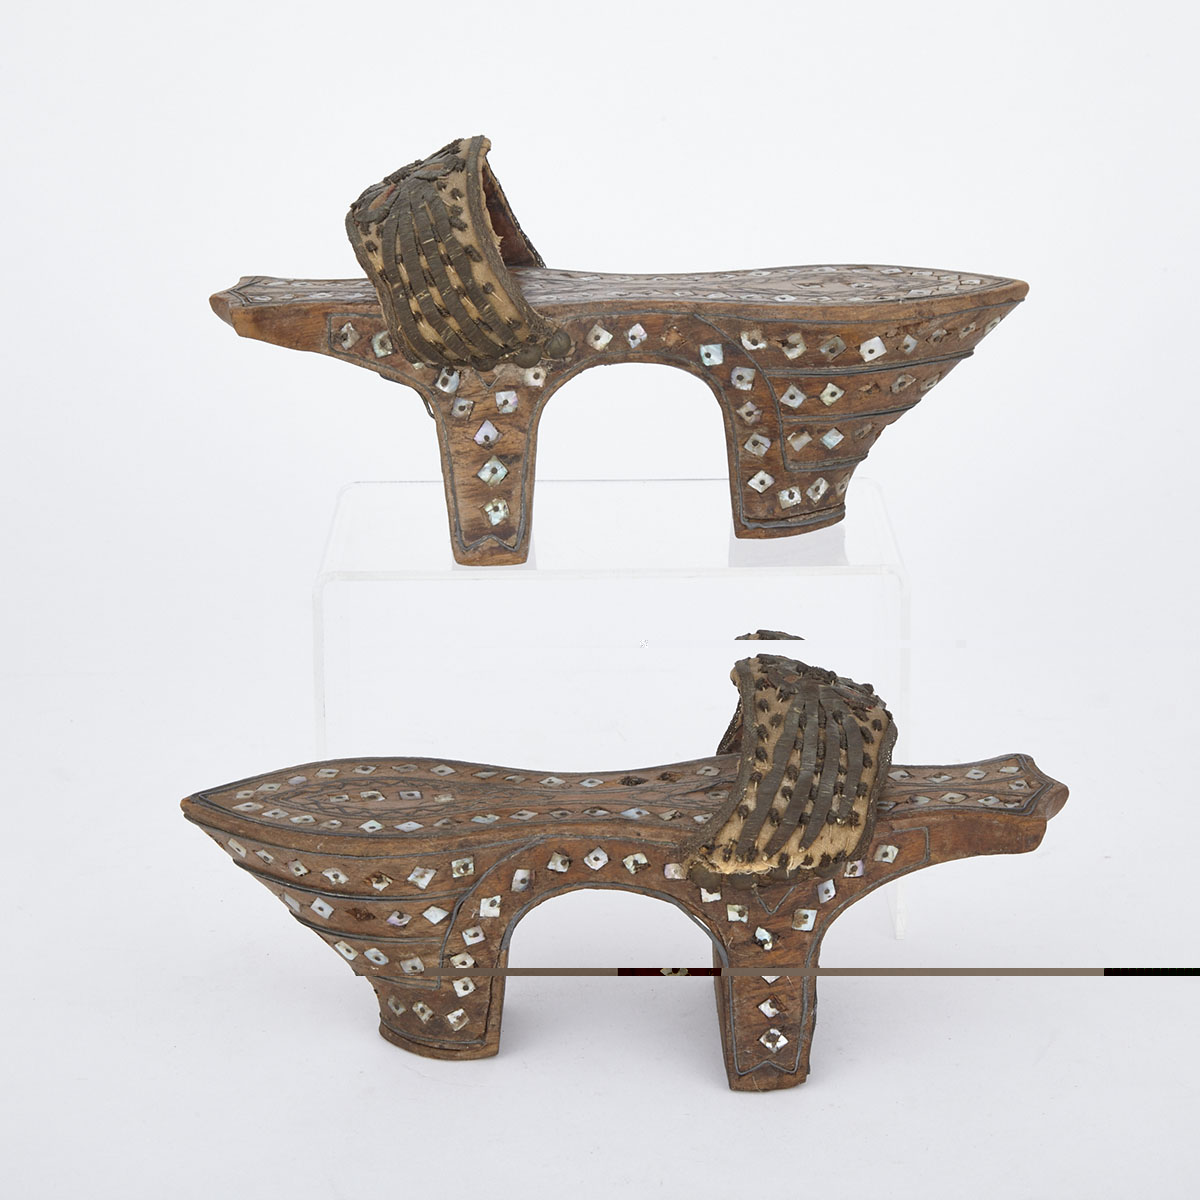 Pair of Turkish Ottoman Hammam  Shoes, 19th/early 20th century